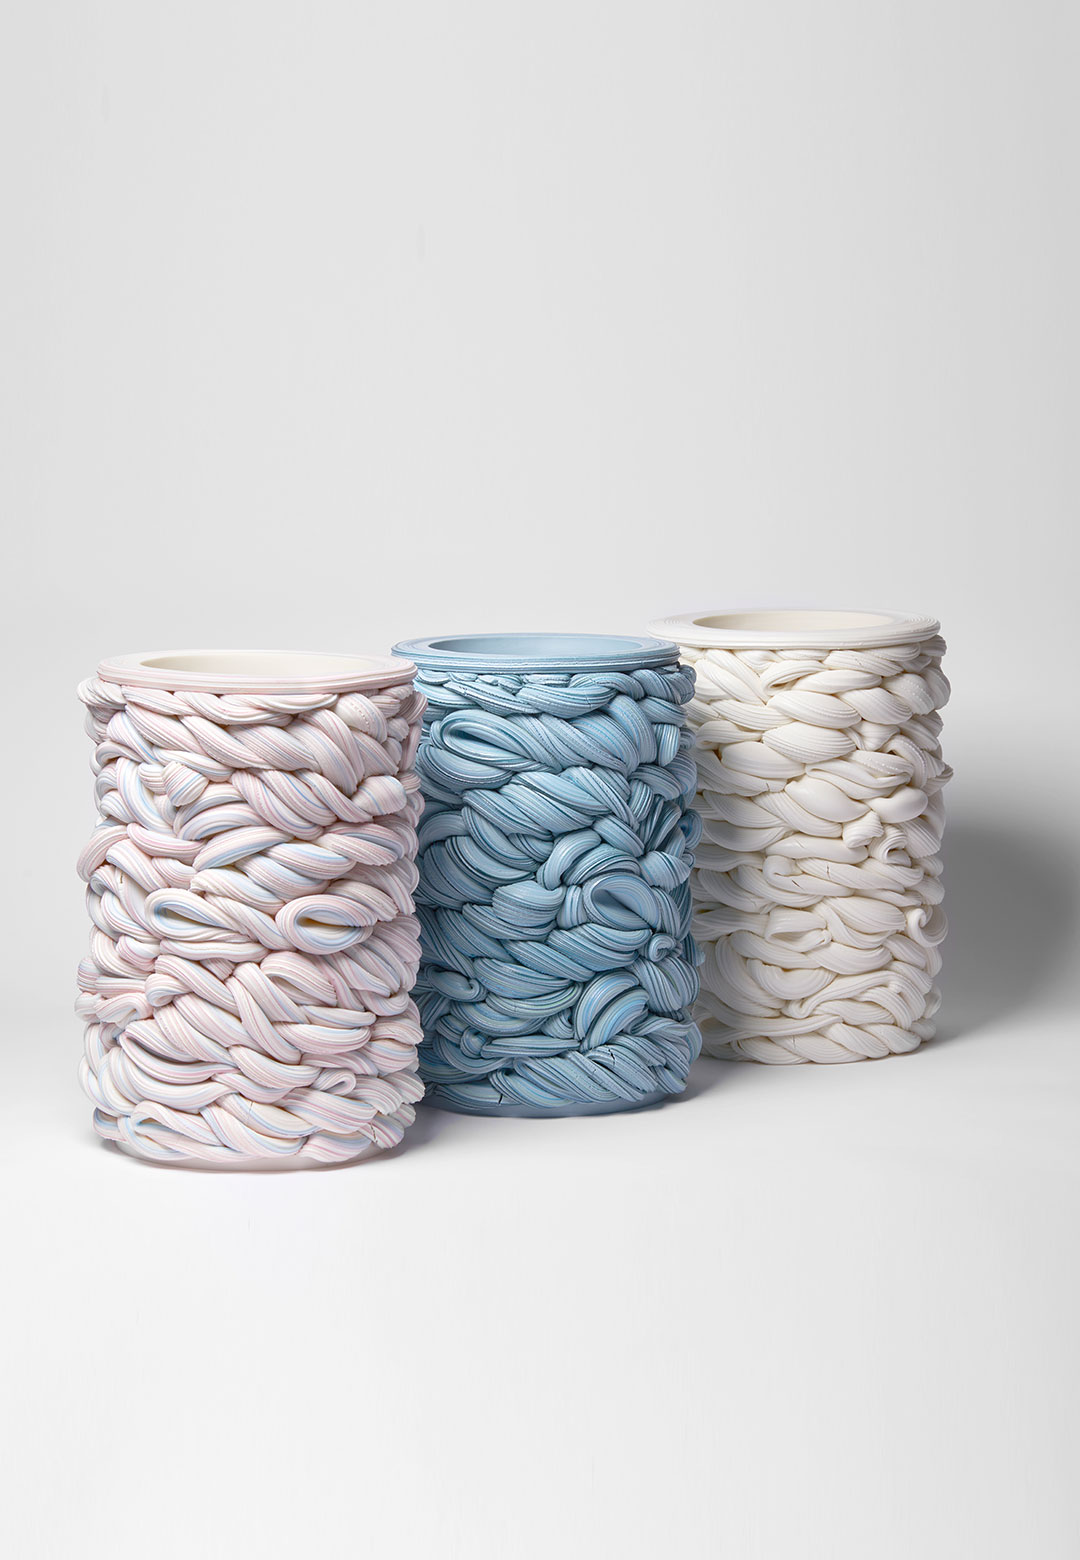 Steven Edwards exhibits a series of candy-like ceramic pieces in ‘Infinite Folds’